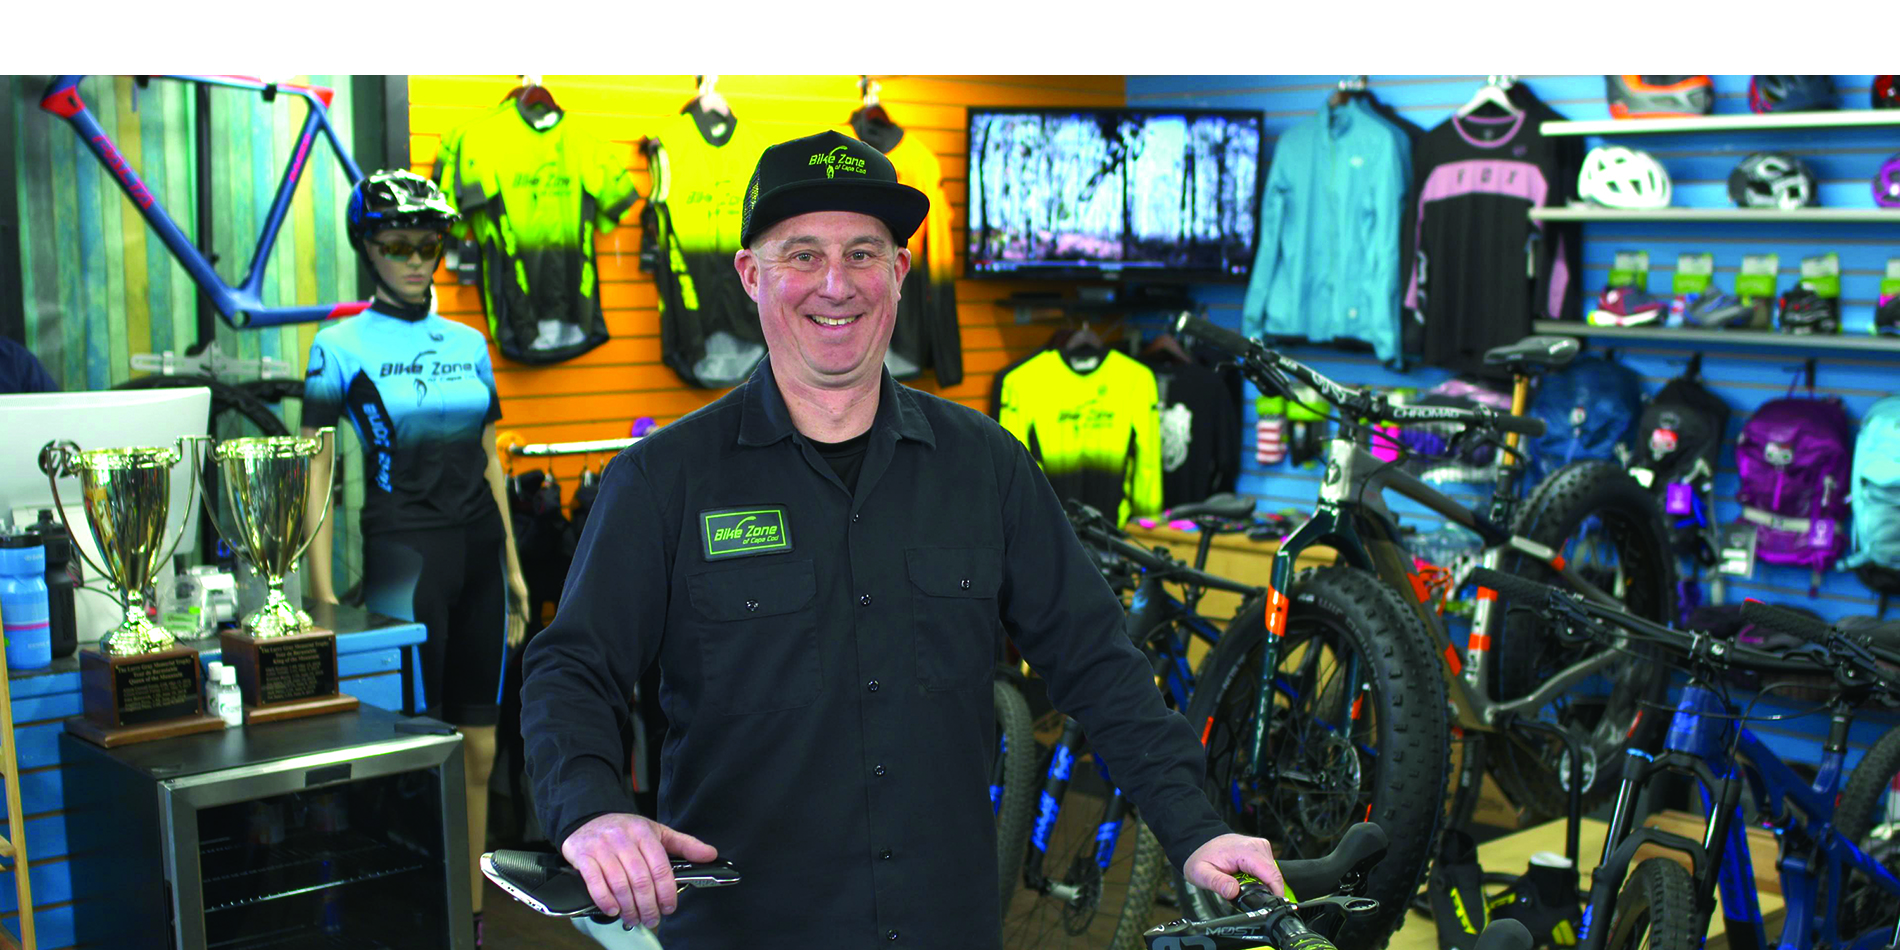 Bike Zone of Cape Cod owner, Tim Alty, stands in his shop with a bike